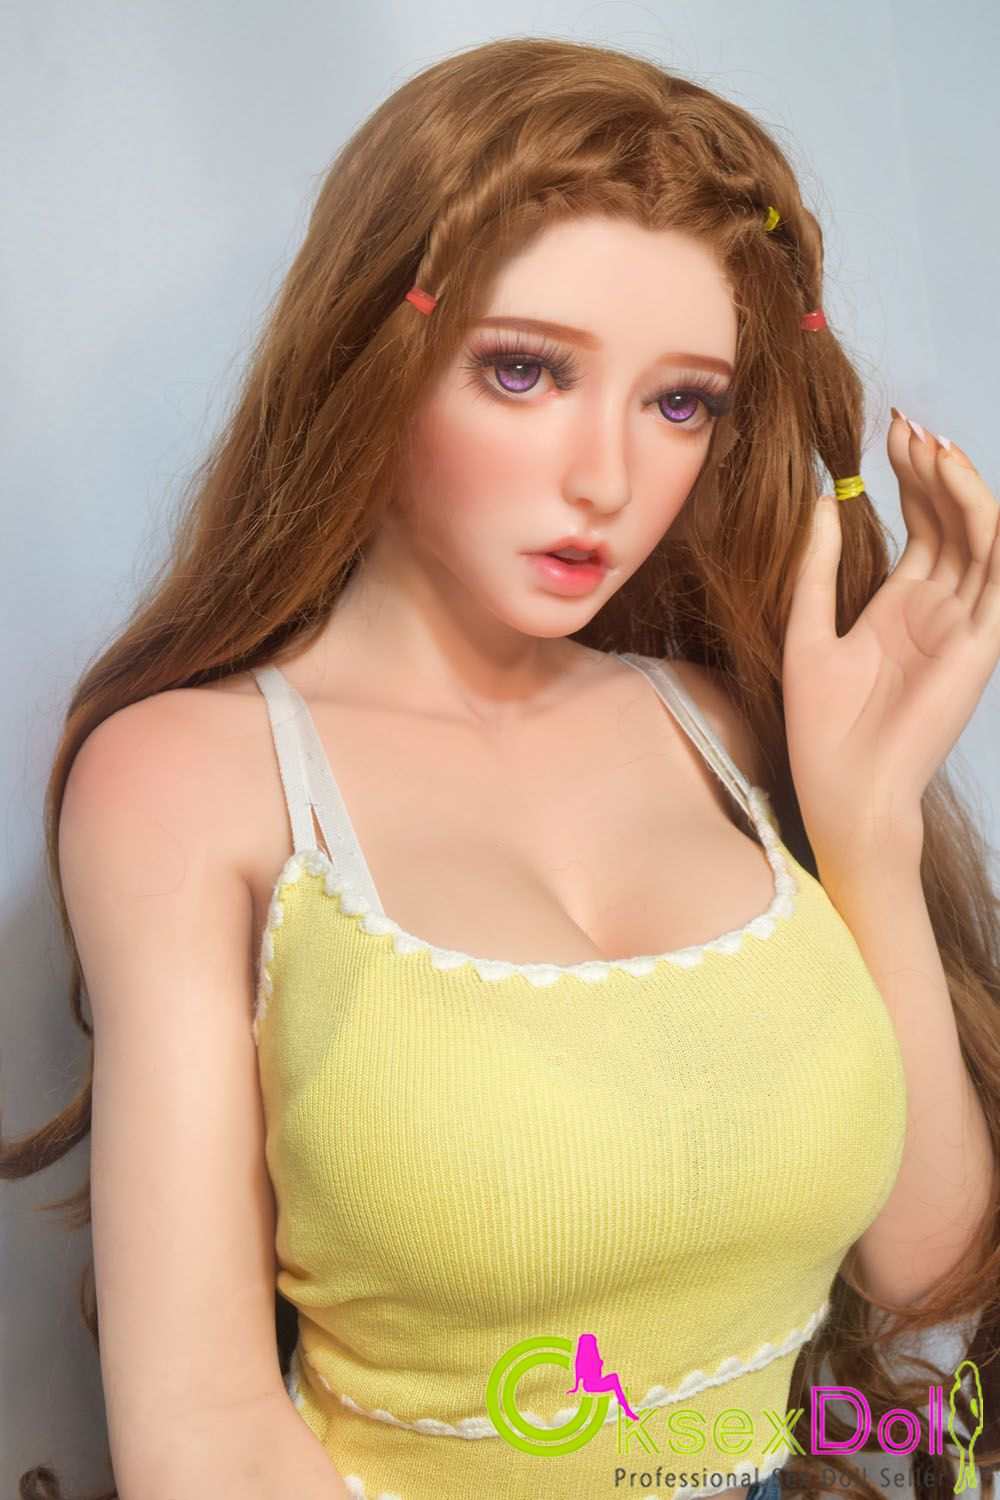 elsababe-doll.html B-cup Real Love Dolls Pictures